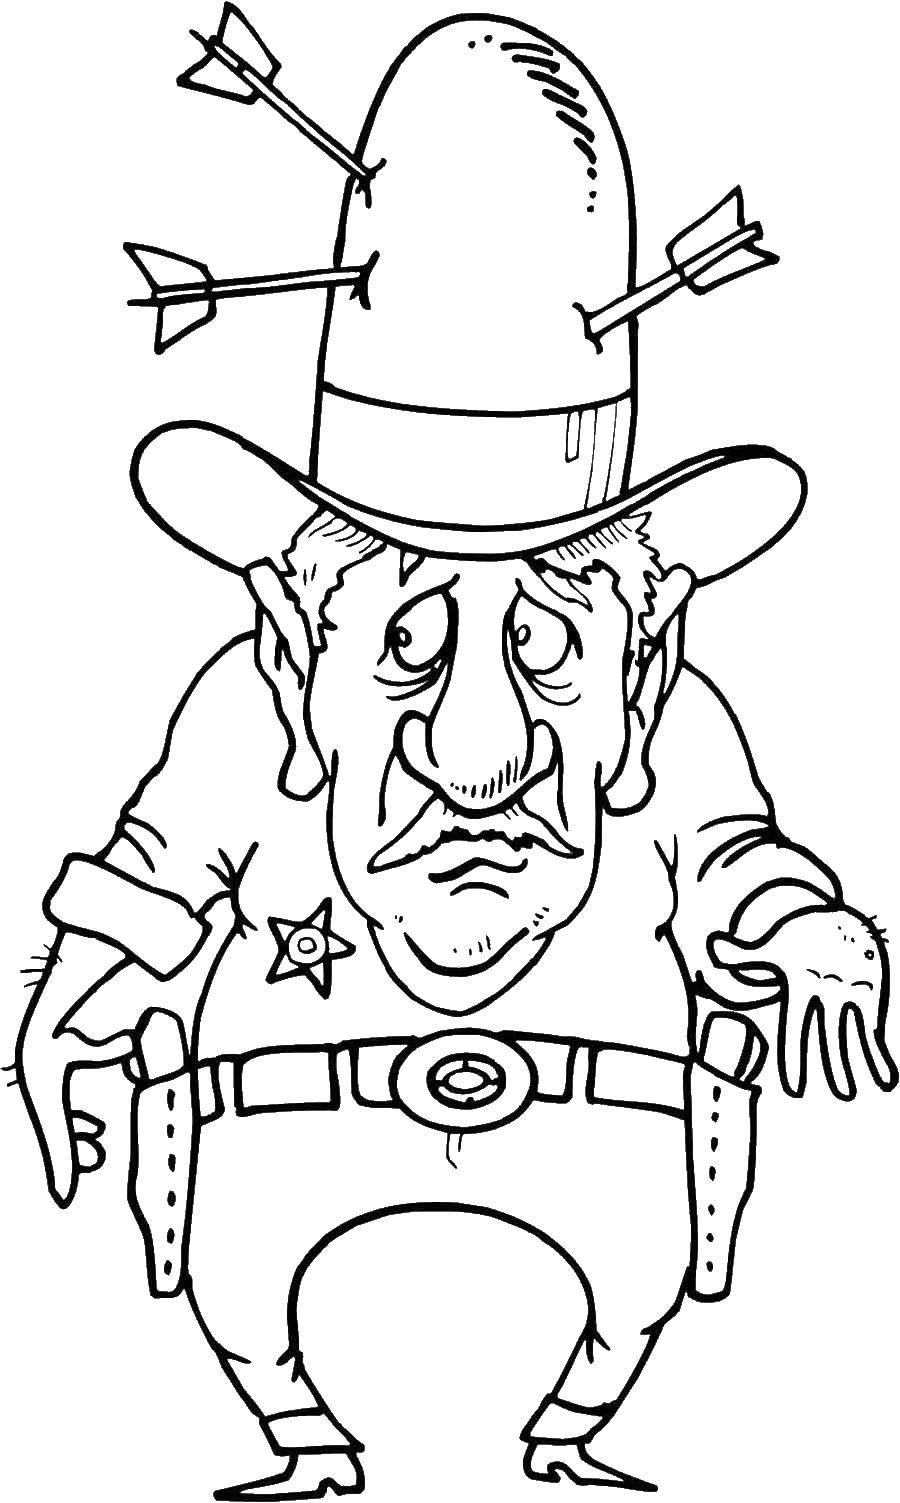 Coloring Sheriff with hat. Category coloring. Tags:  Sheriff badge, hat.